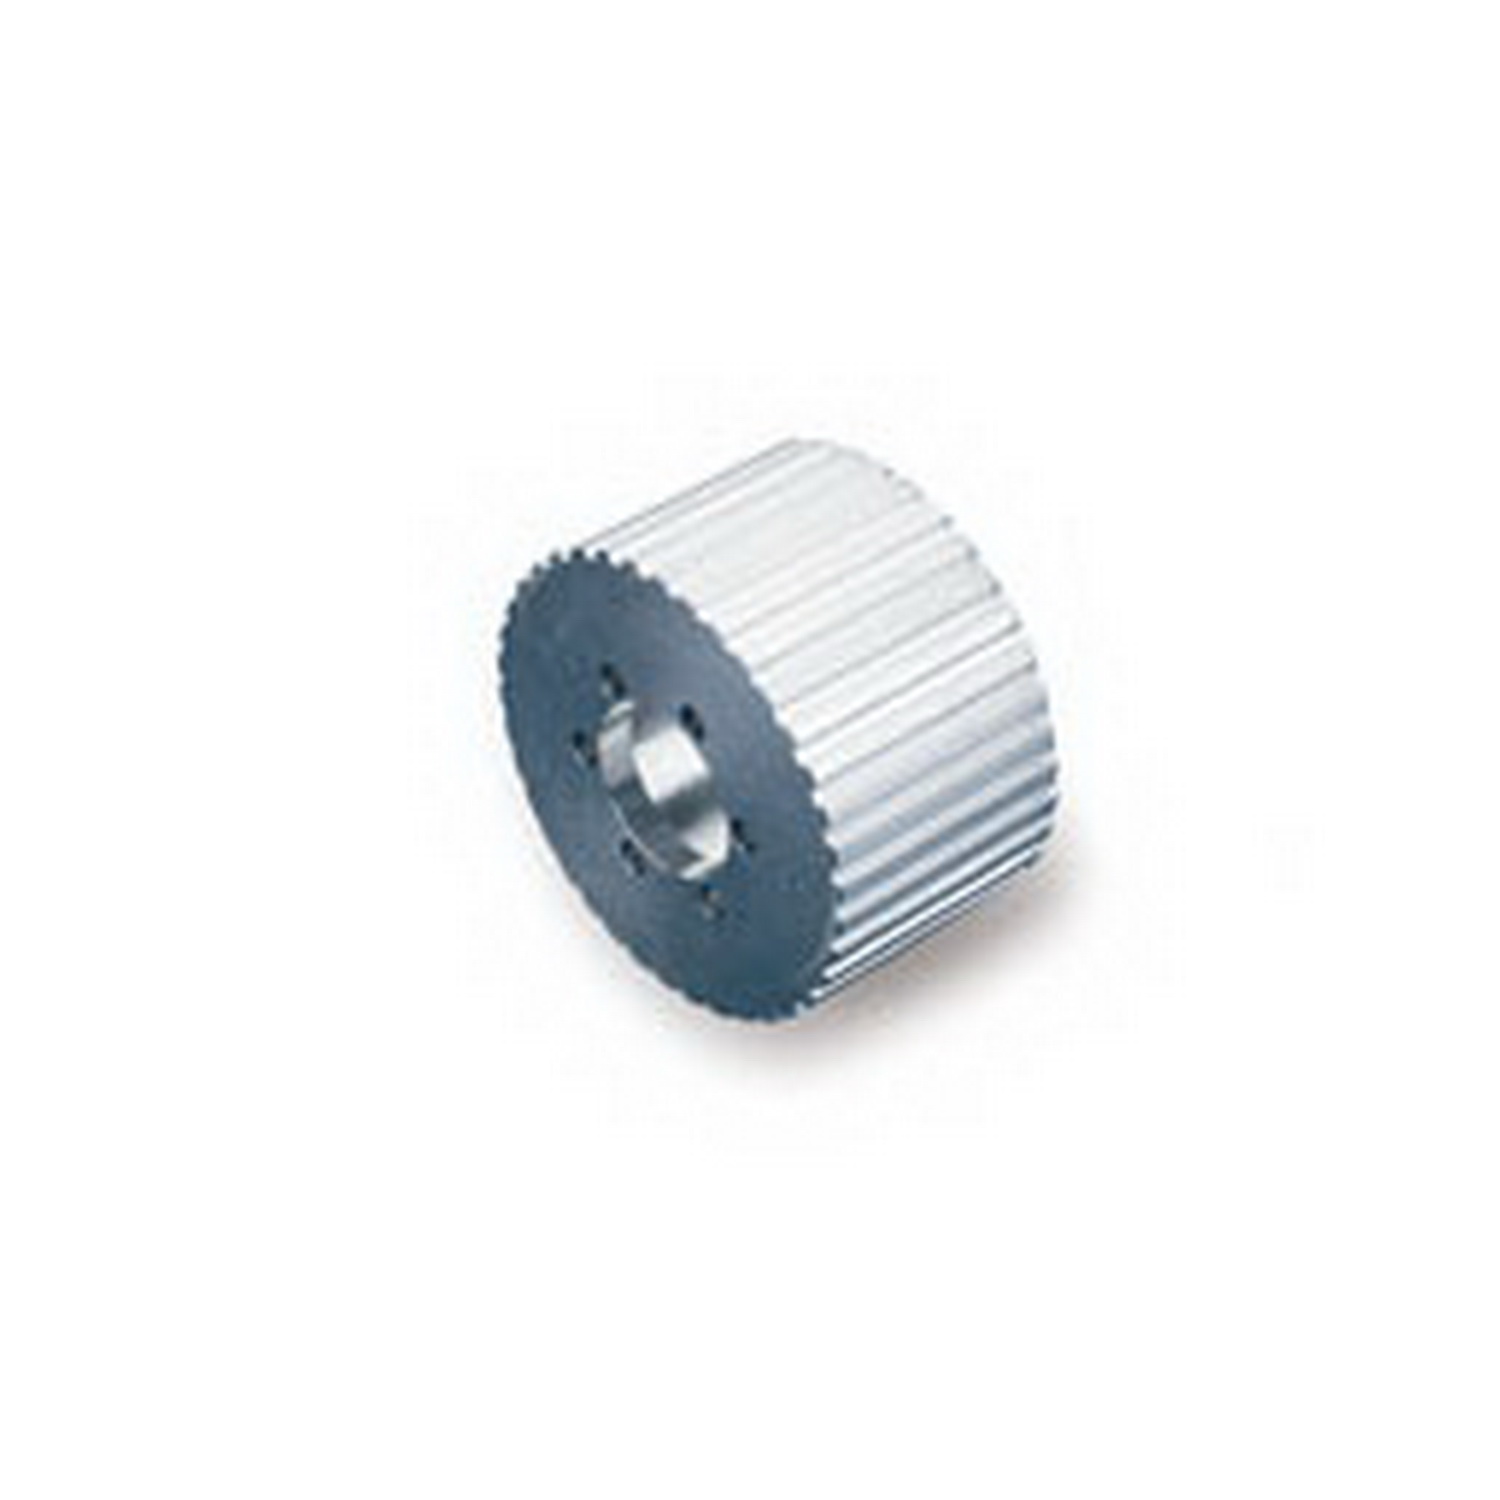 Weiand Weiand 7029-38 0.5 in. Pitch Drive Pulley